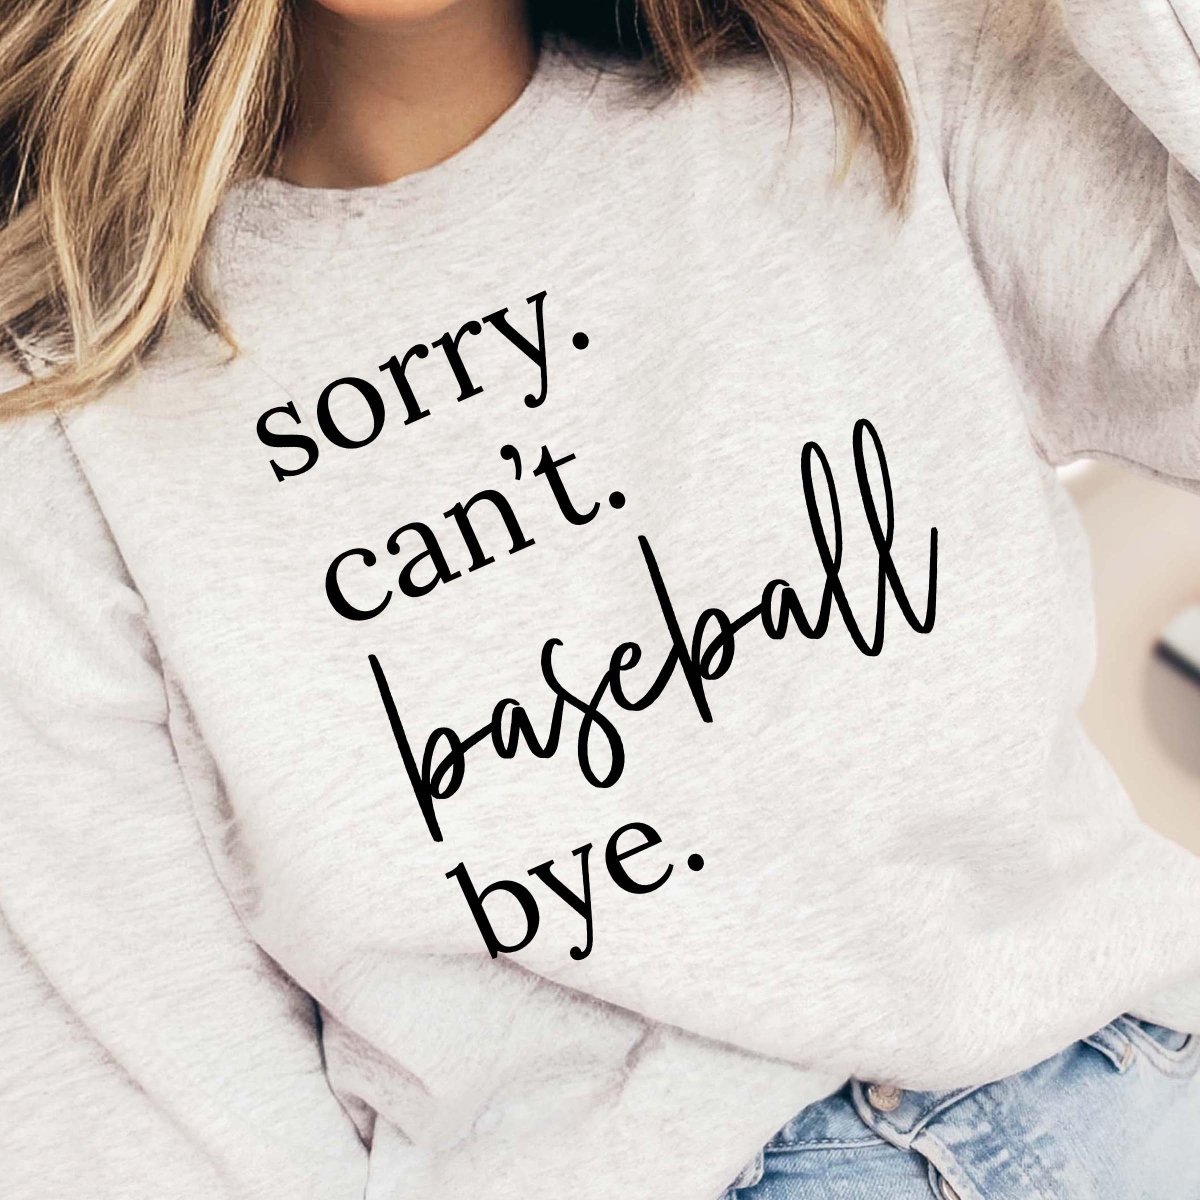 Graphic of the Month- Sorry Can't Baseball Bye Crewneck Sweatshirt - Limeberry Designs